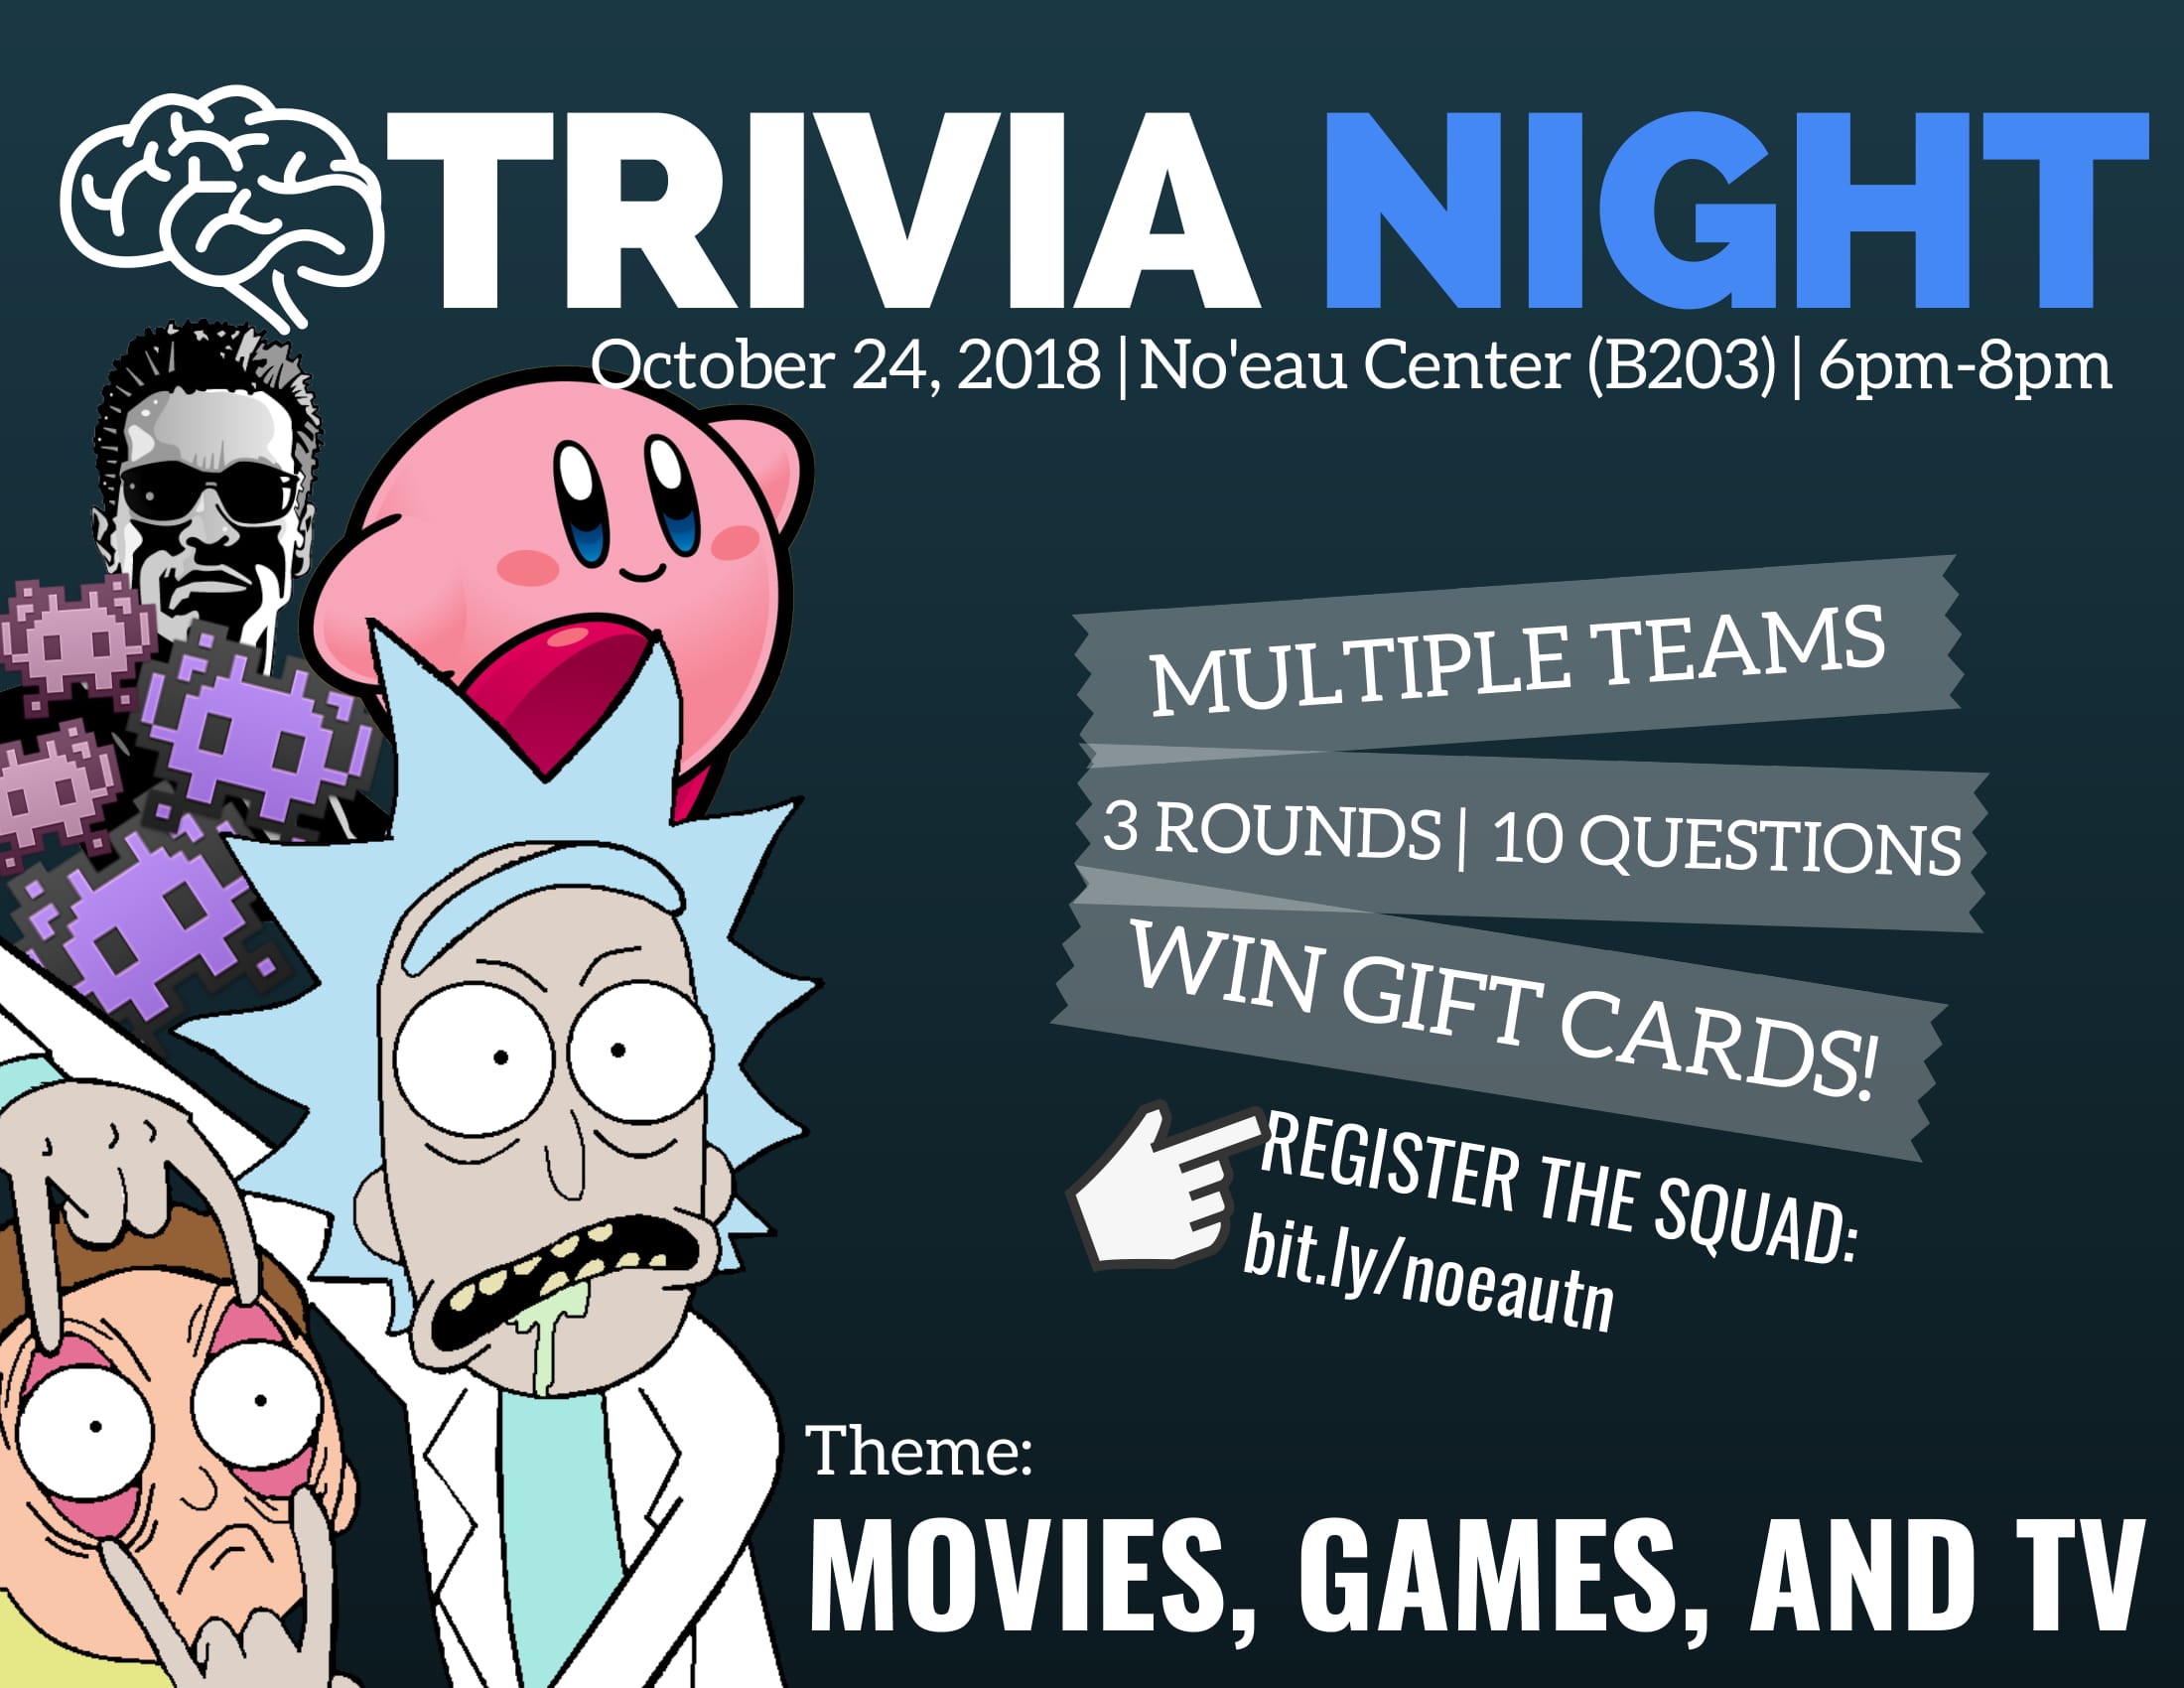 Flier for Trivial Night that contains same information as is in the article